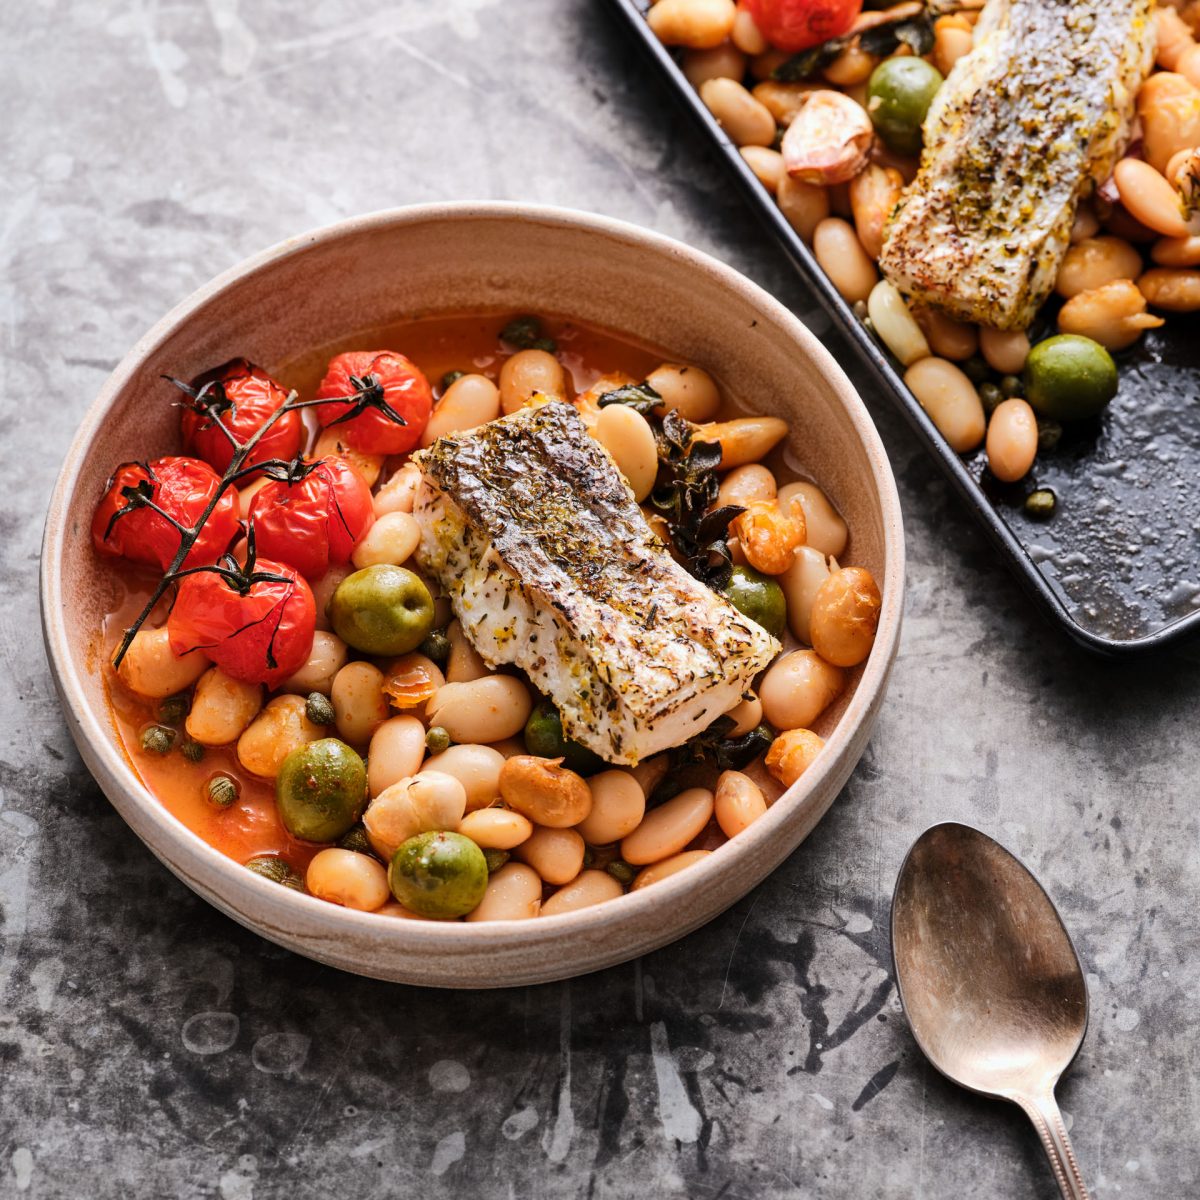 Cod dish with tomatoes and chickpeas roasted in the oven on a grey background with an antique spoon